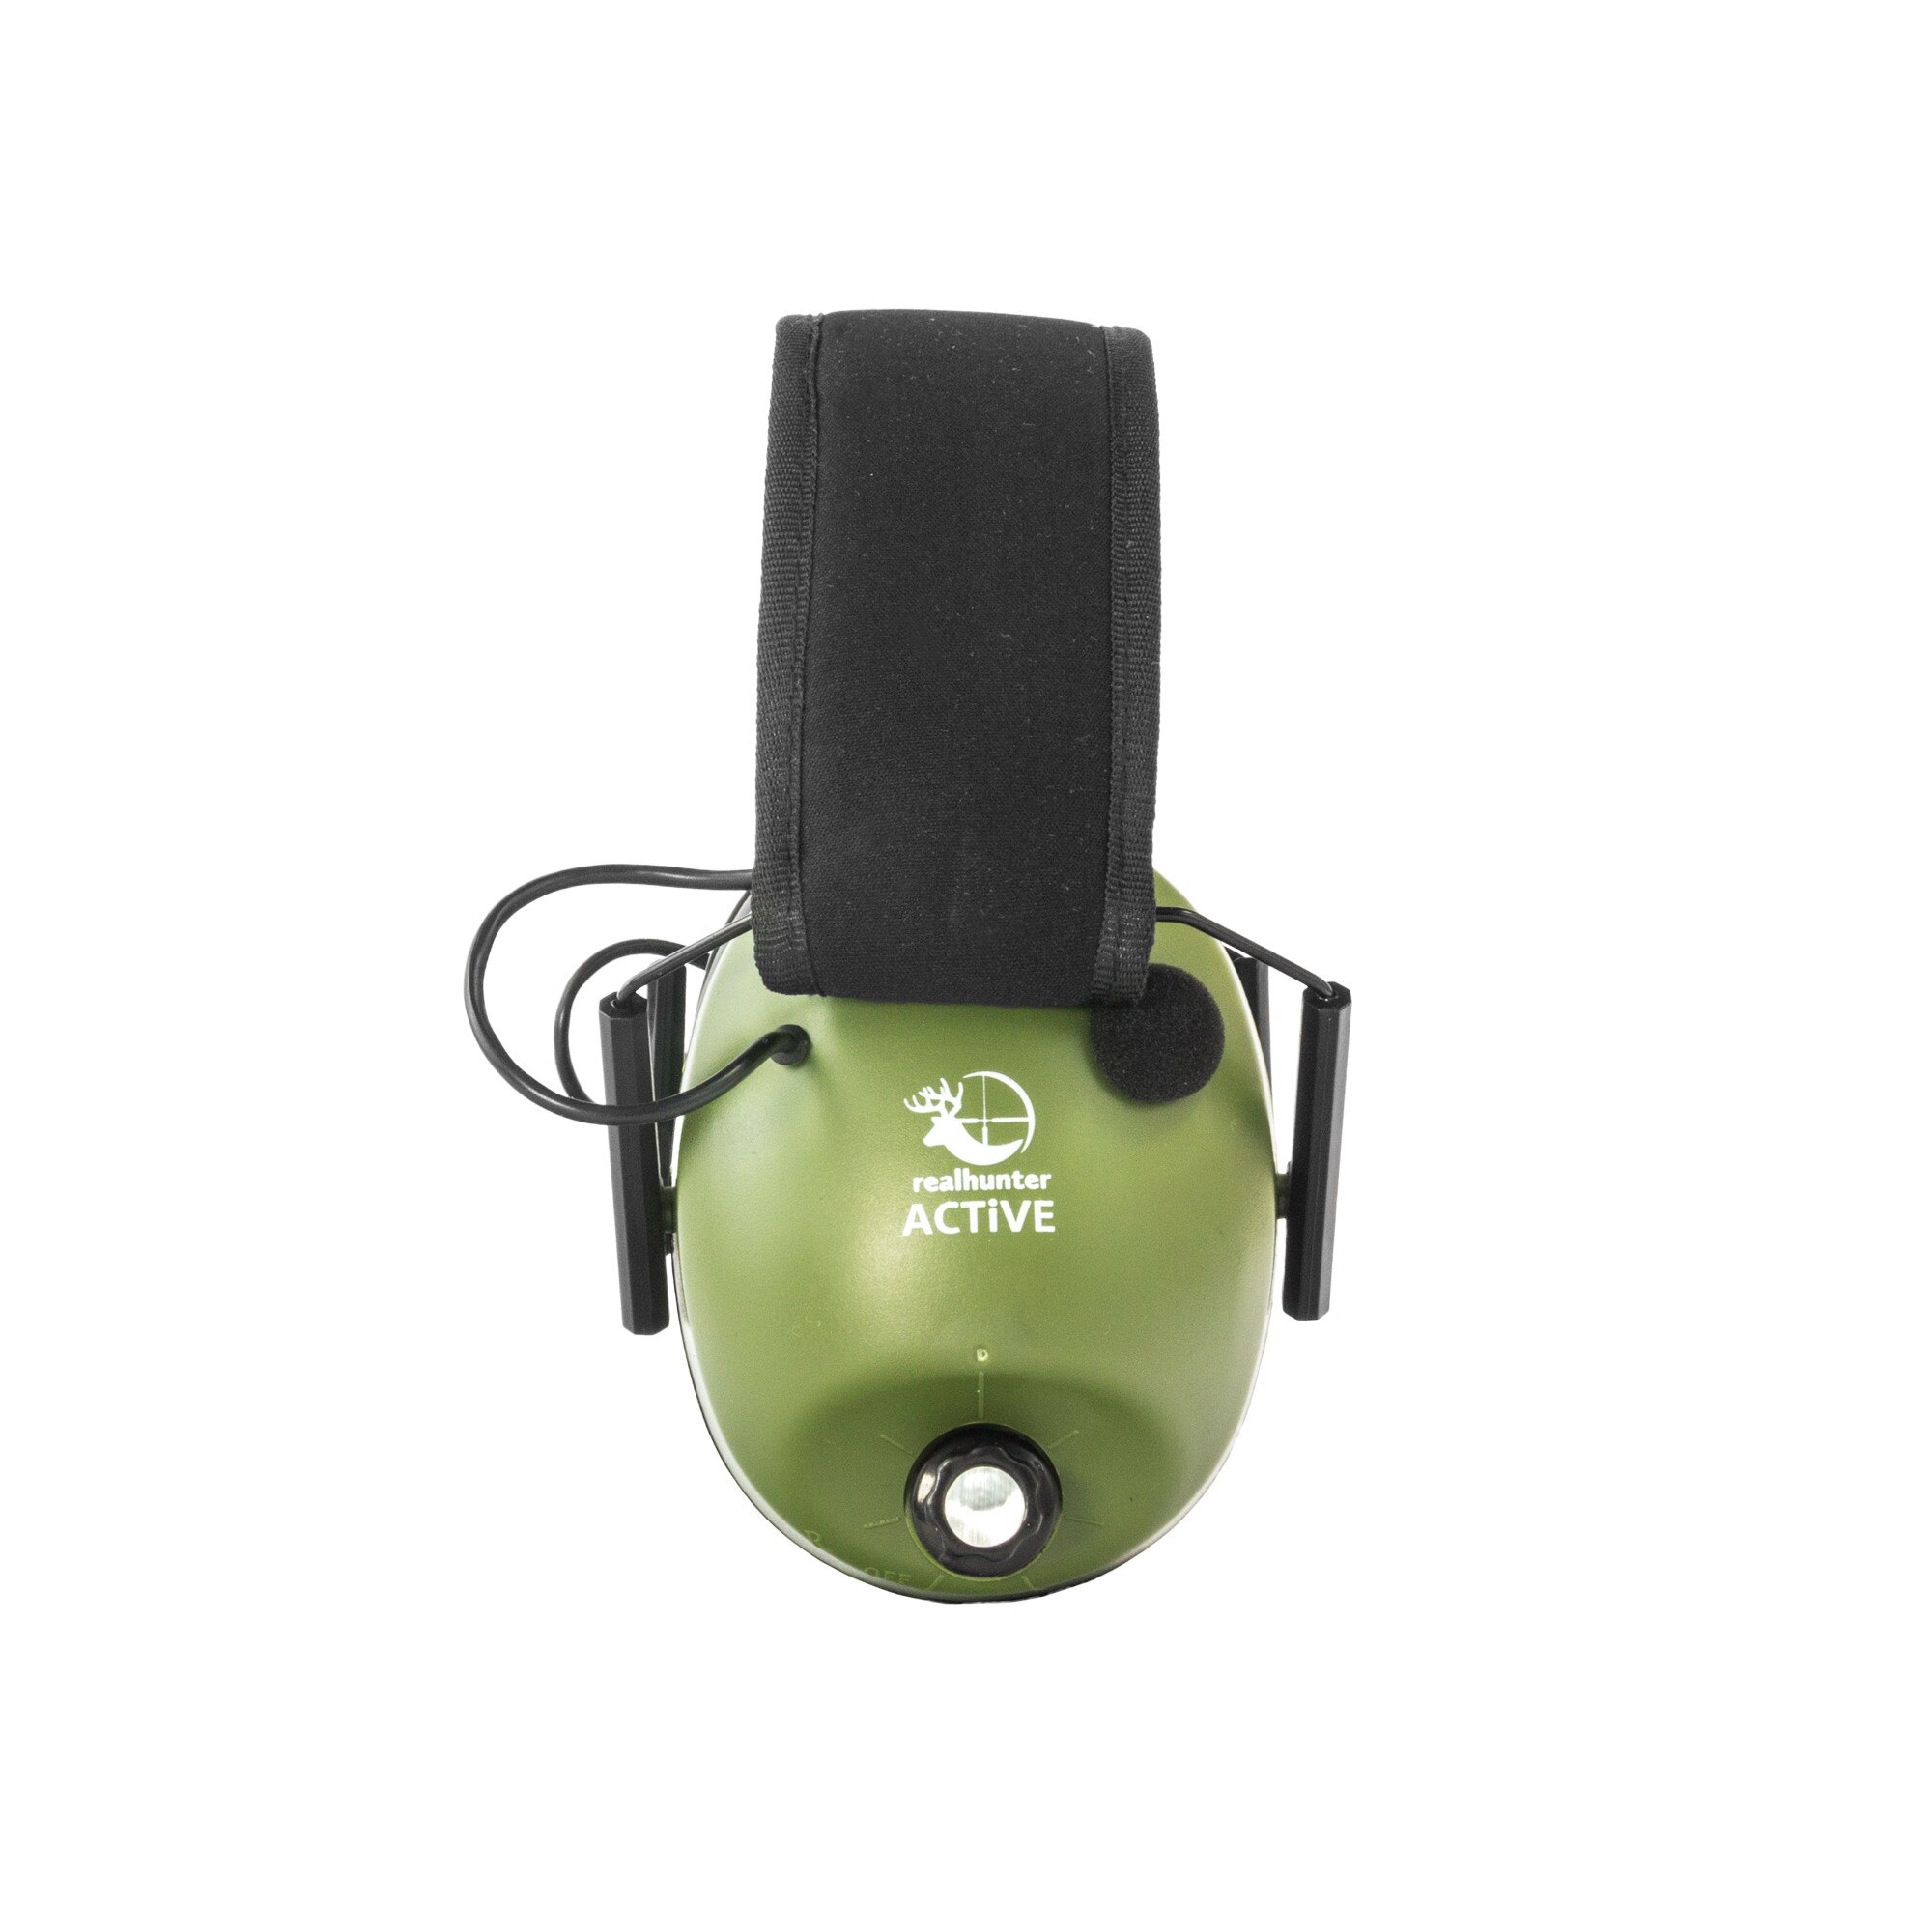 spherical chilly Realistic Casti RealHunter Active, Blocare suntete peste 85 dB, 260 g, Verde - eMAG.ro